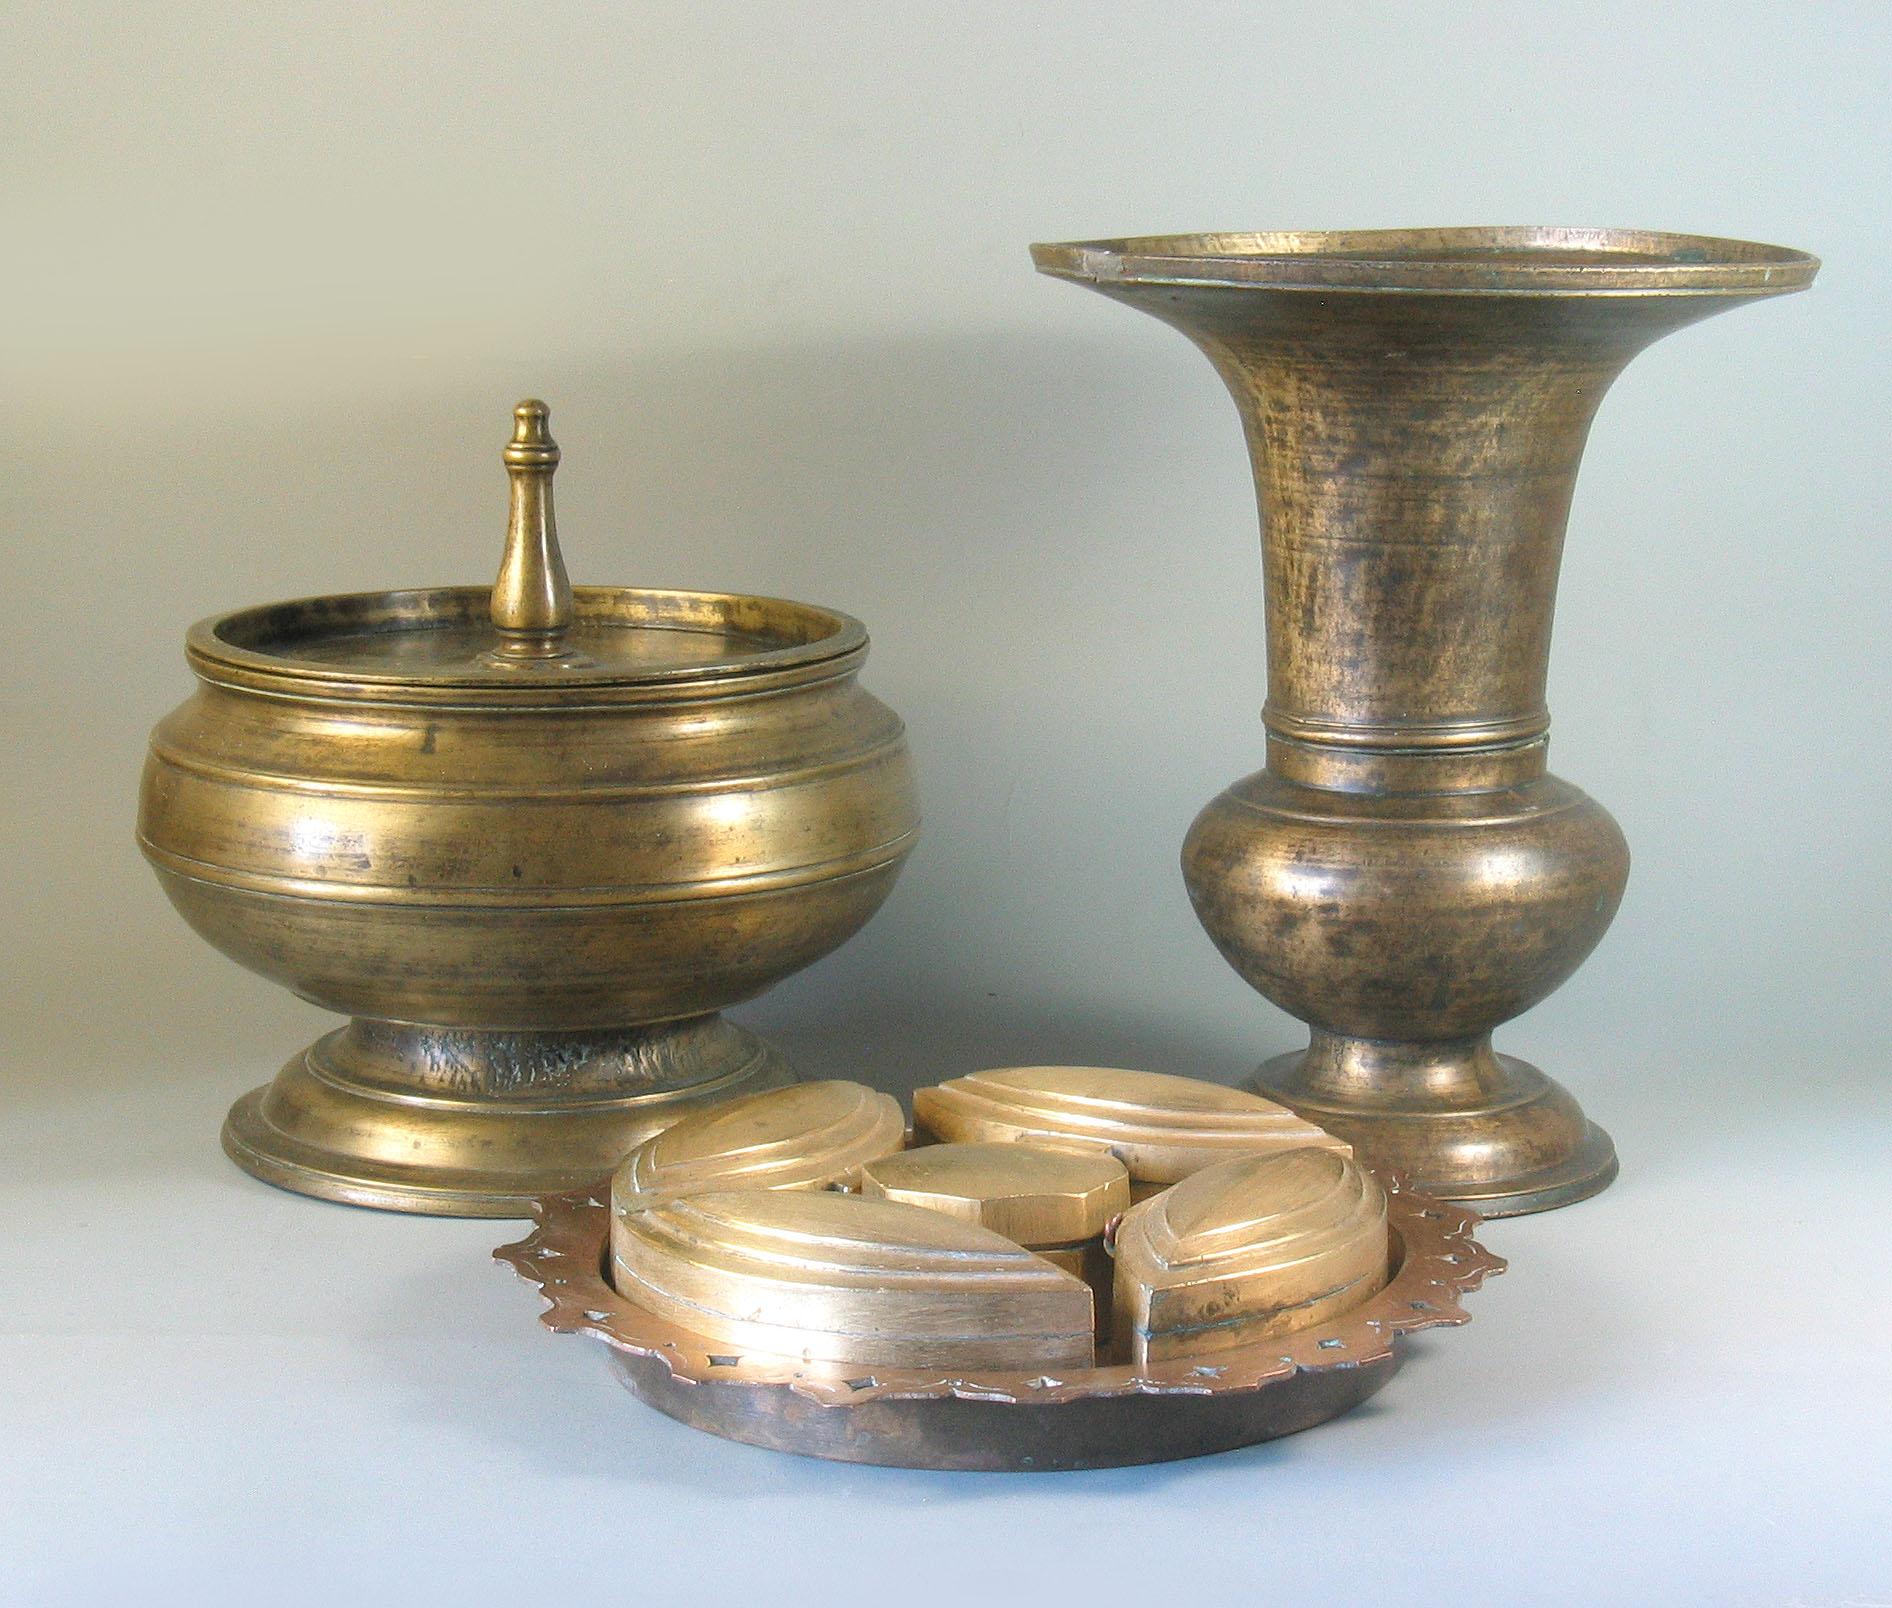 Brass Betel Nut Box & Cover together with Spitton and Brass Betel Nut Set 5